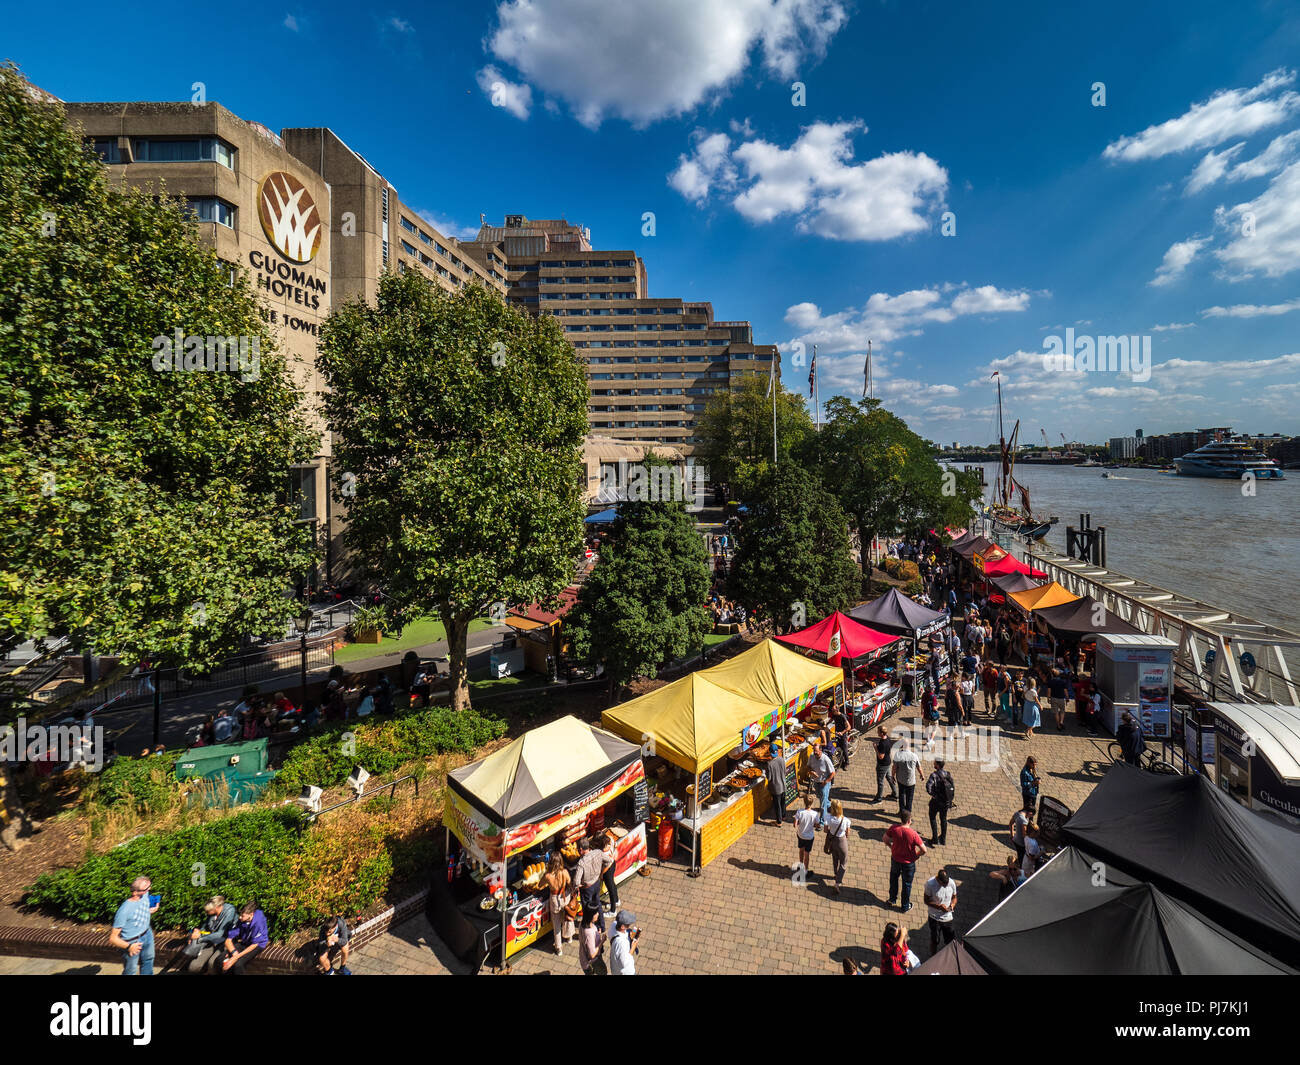 Tower Hotel and Street Food Market near Tower Bridge, Central London Stock Photo